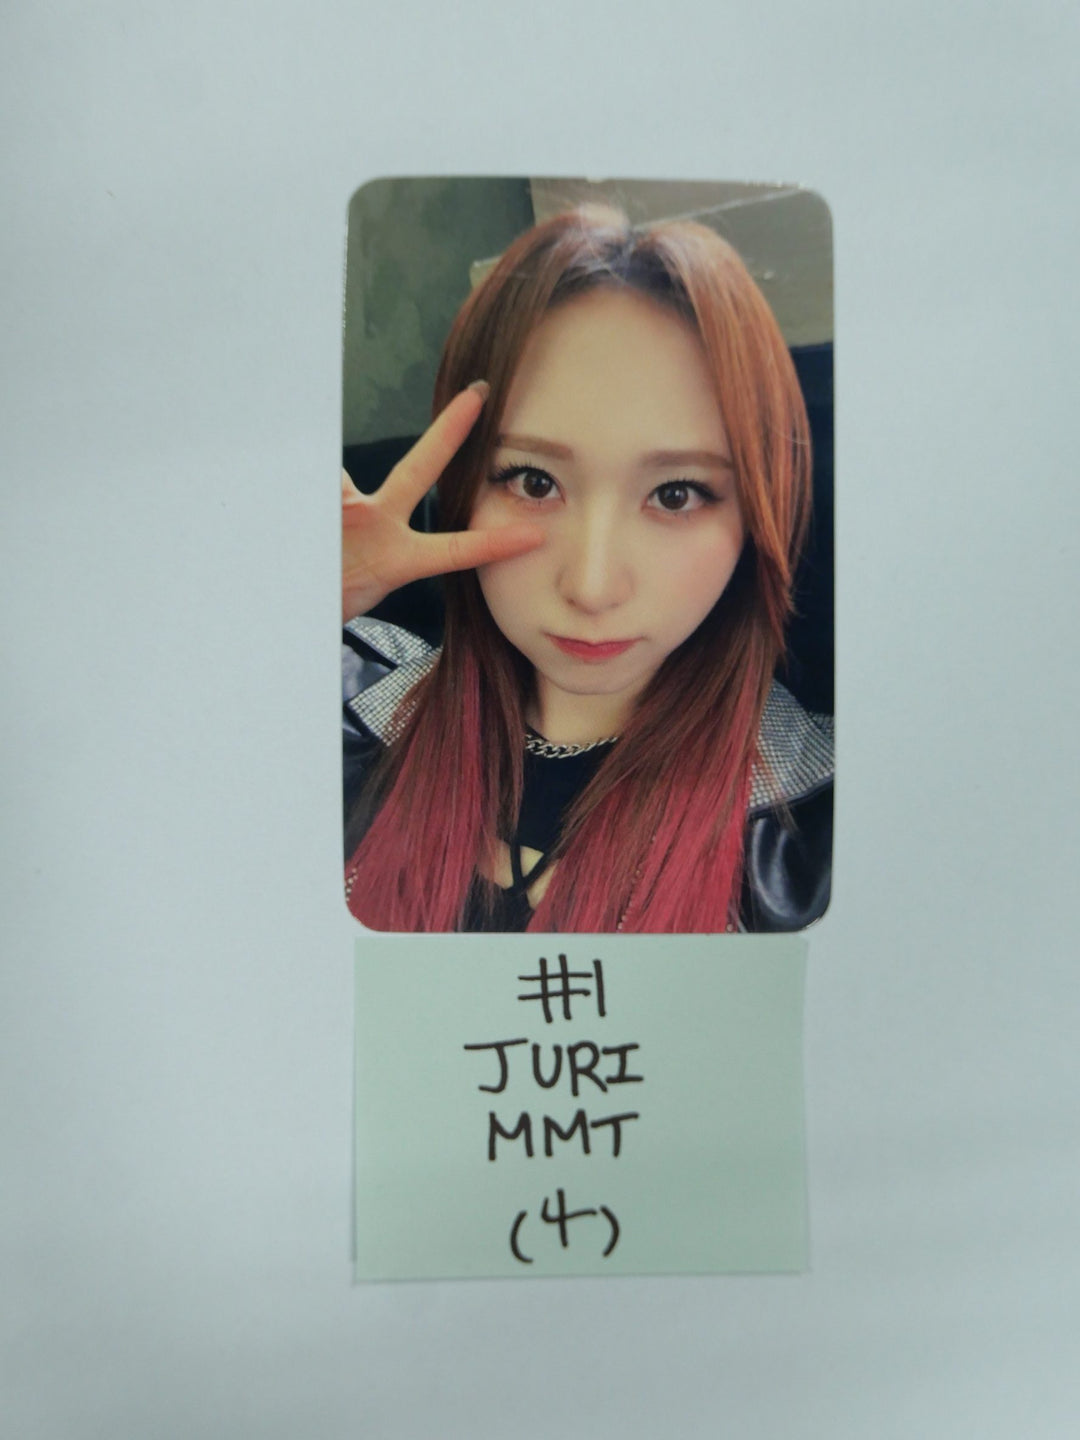 Rocket Punch 'Yellow Punch' - MMT Fansign Event Photocard